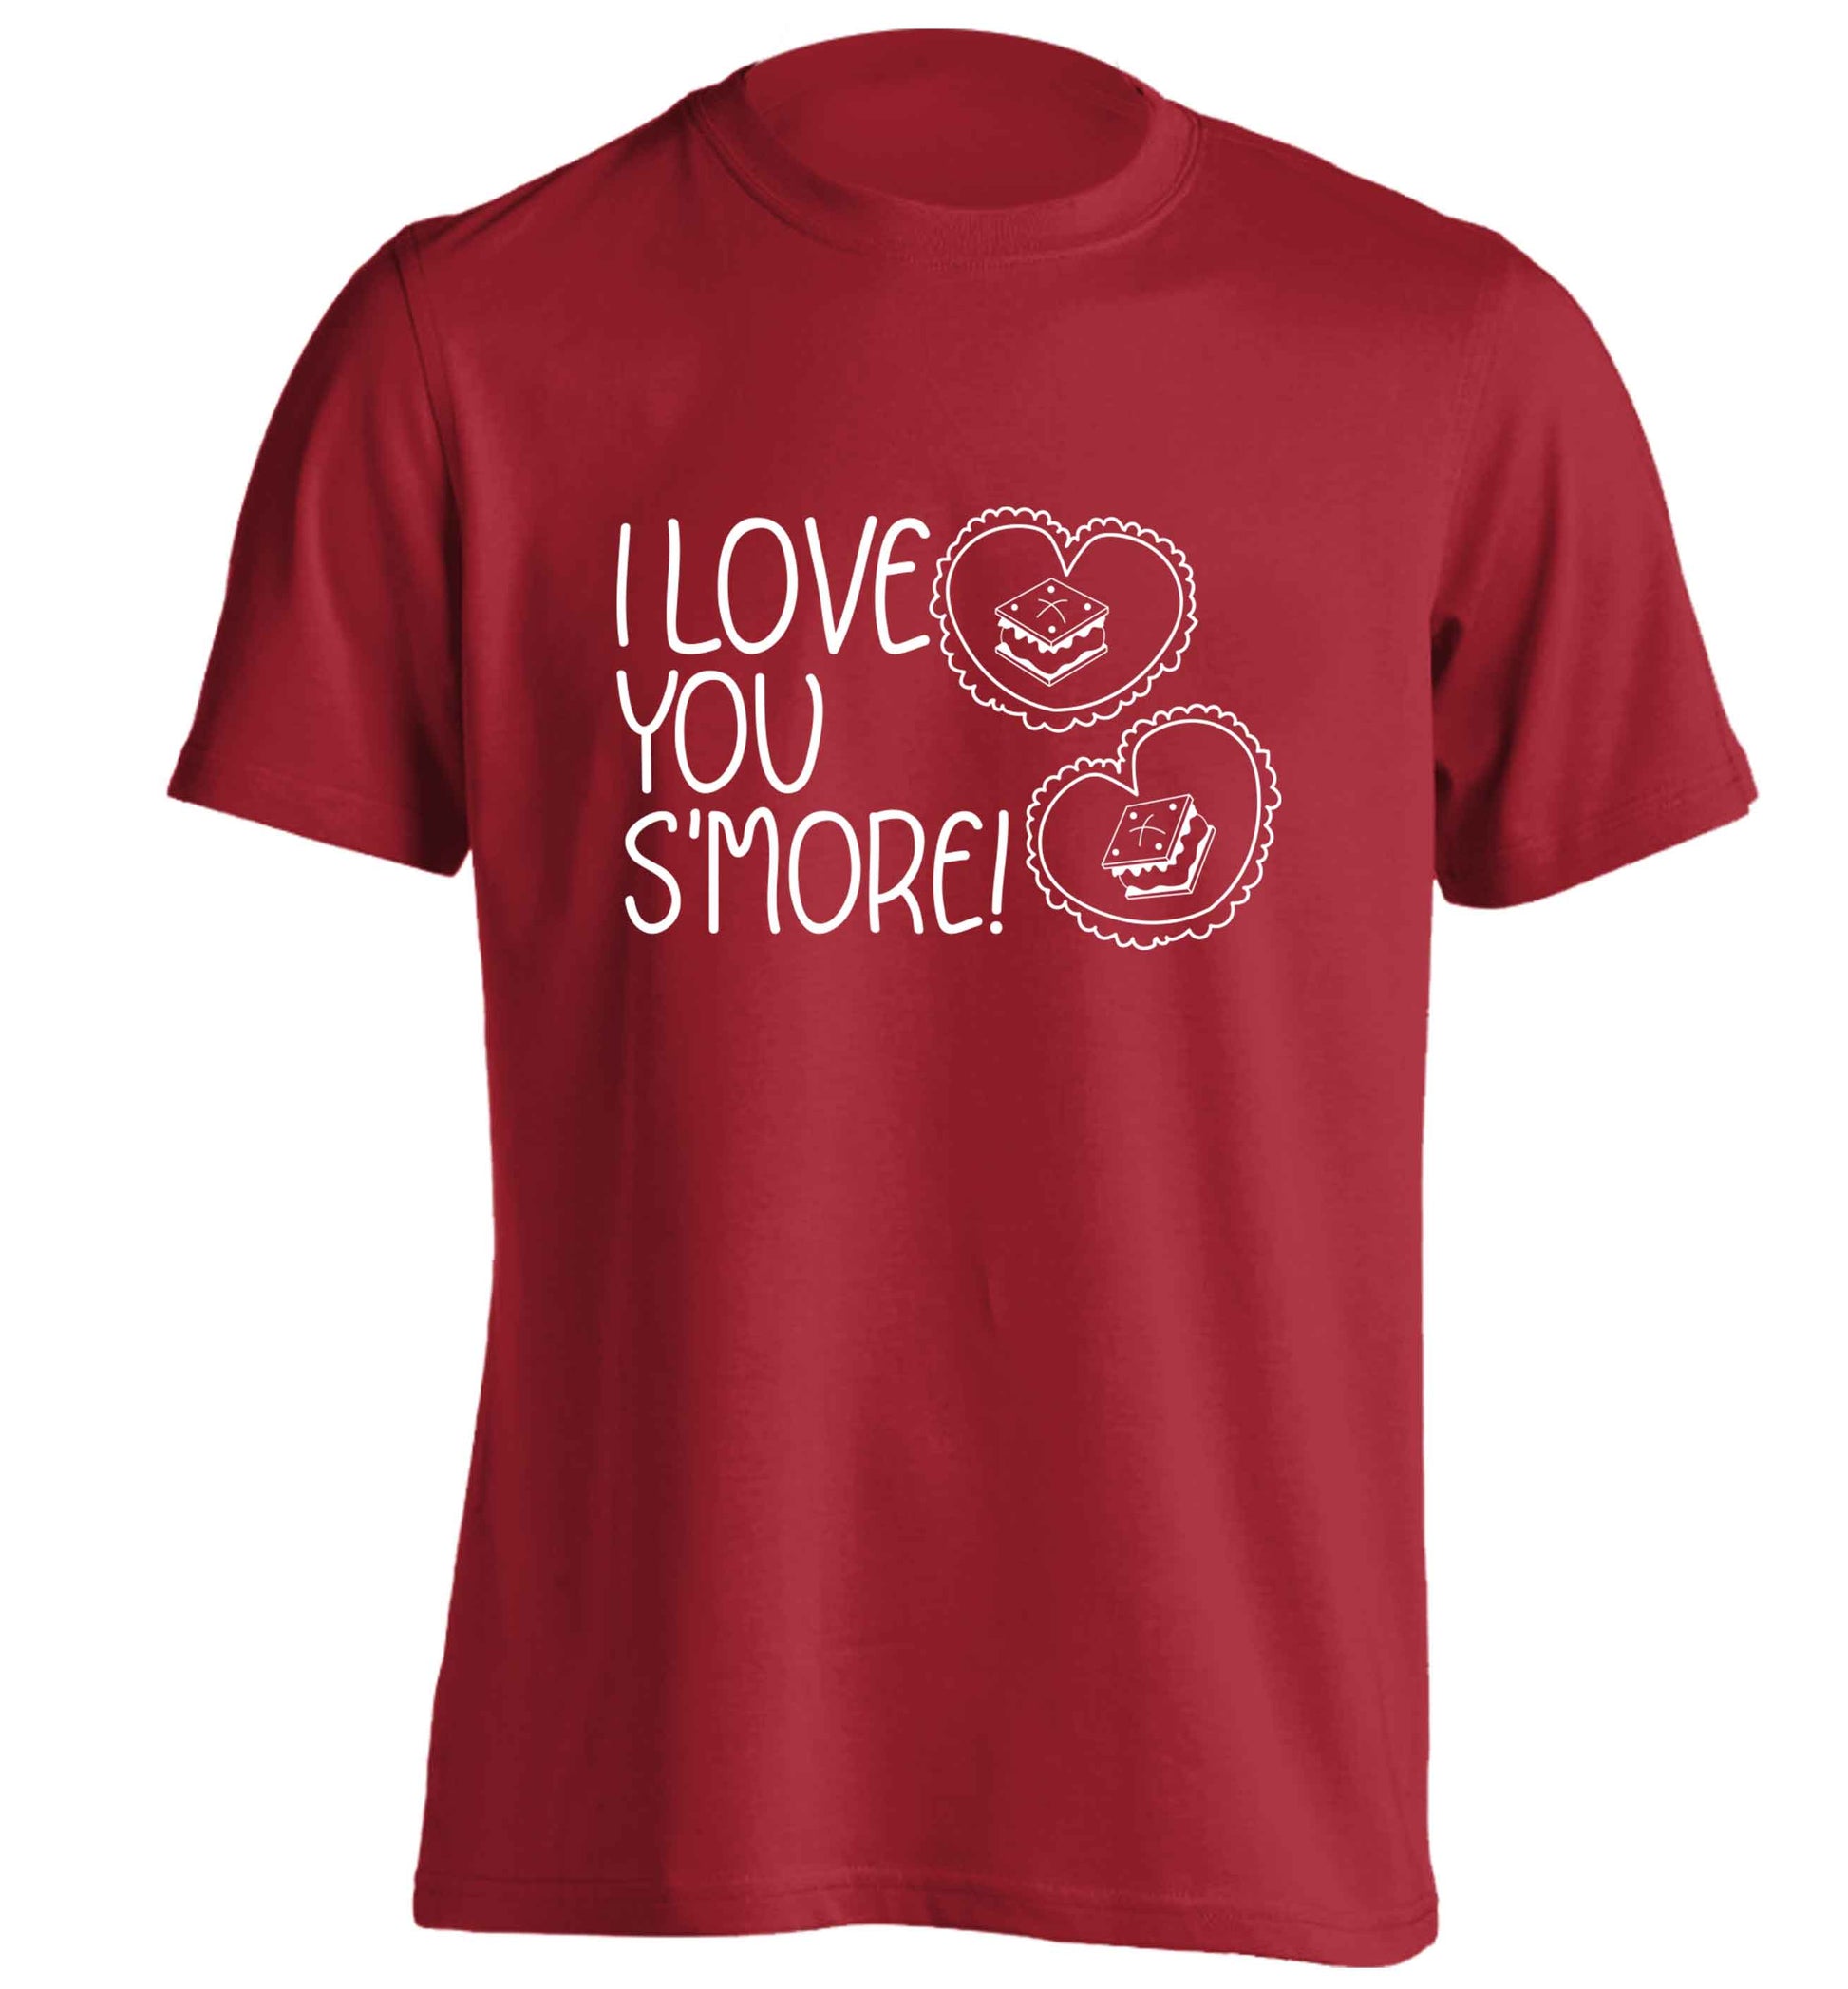 I love you s'more than anything adults unisex red Tshirt 2XL